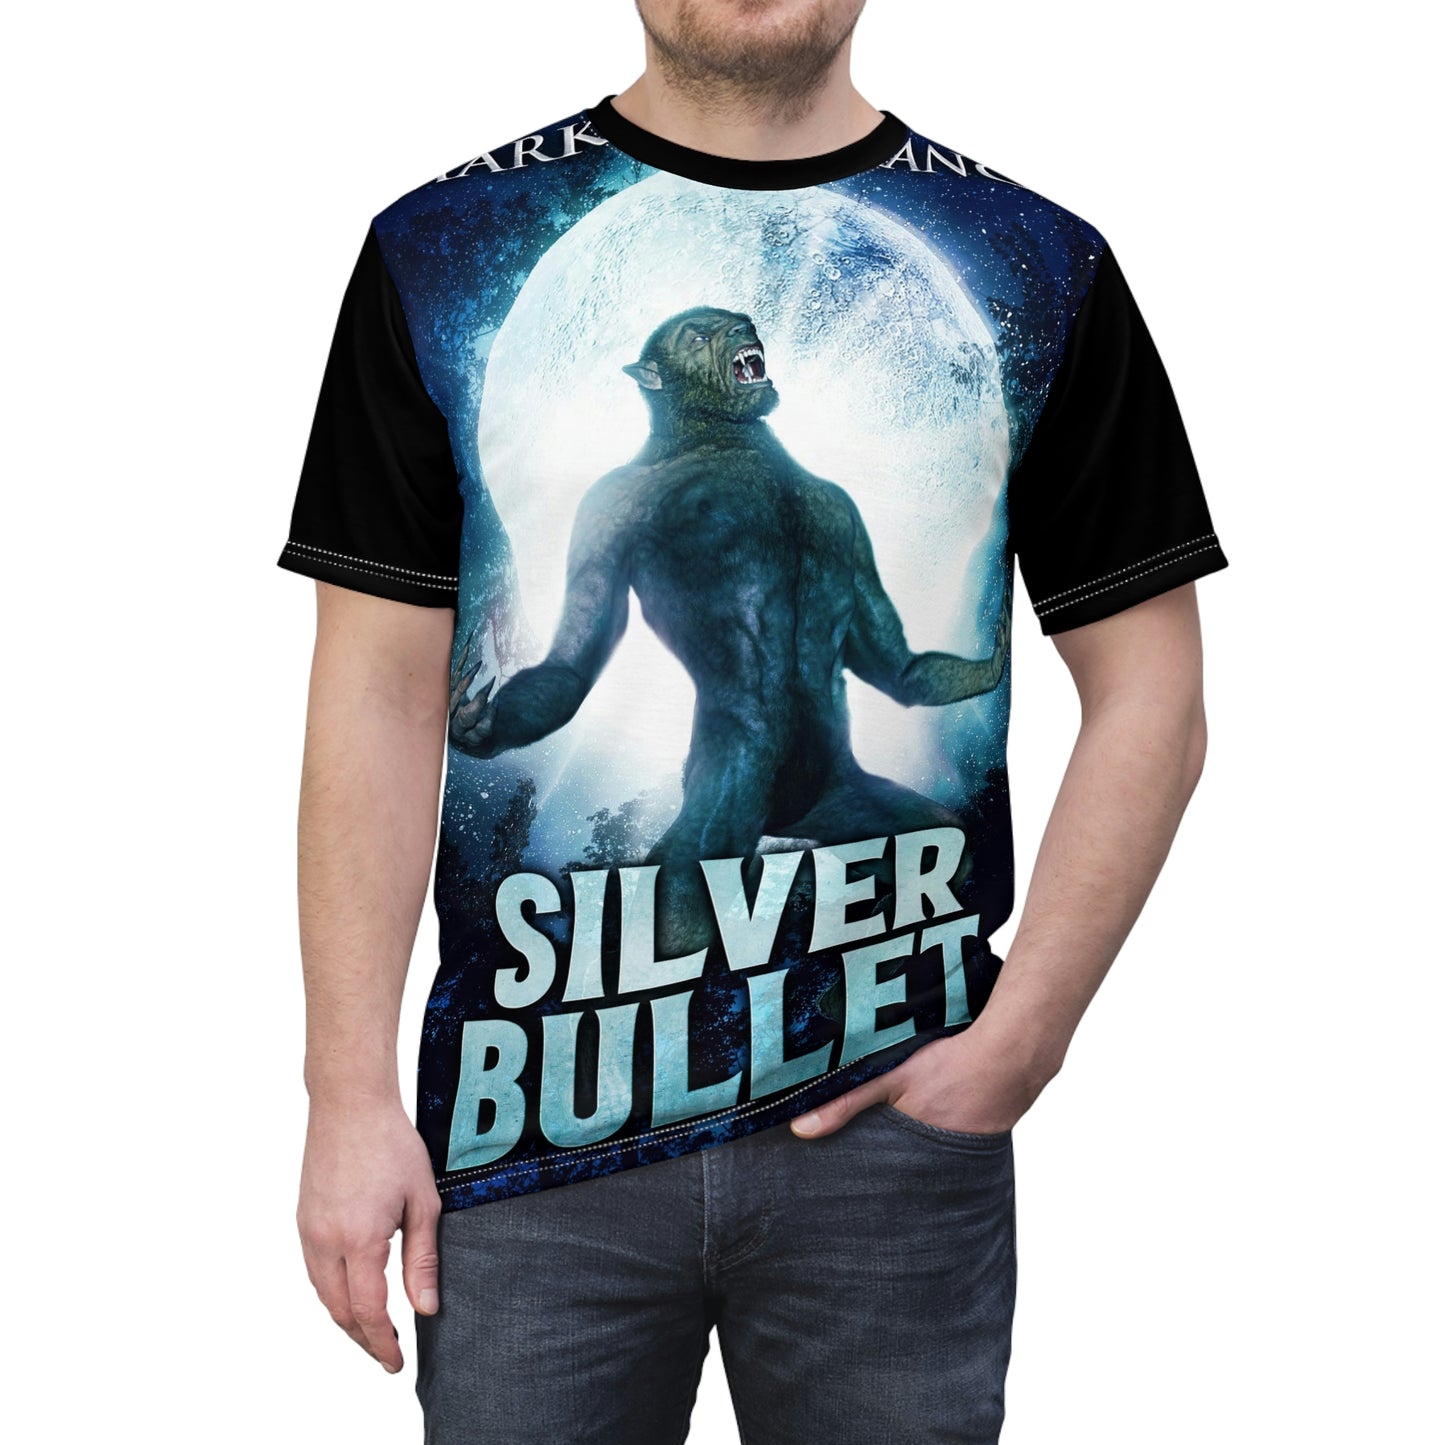 Silver Bullet - Unisex All-Over Print Cut & Sew T-Shirt